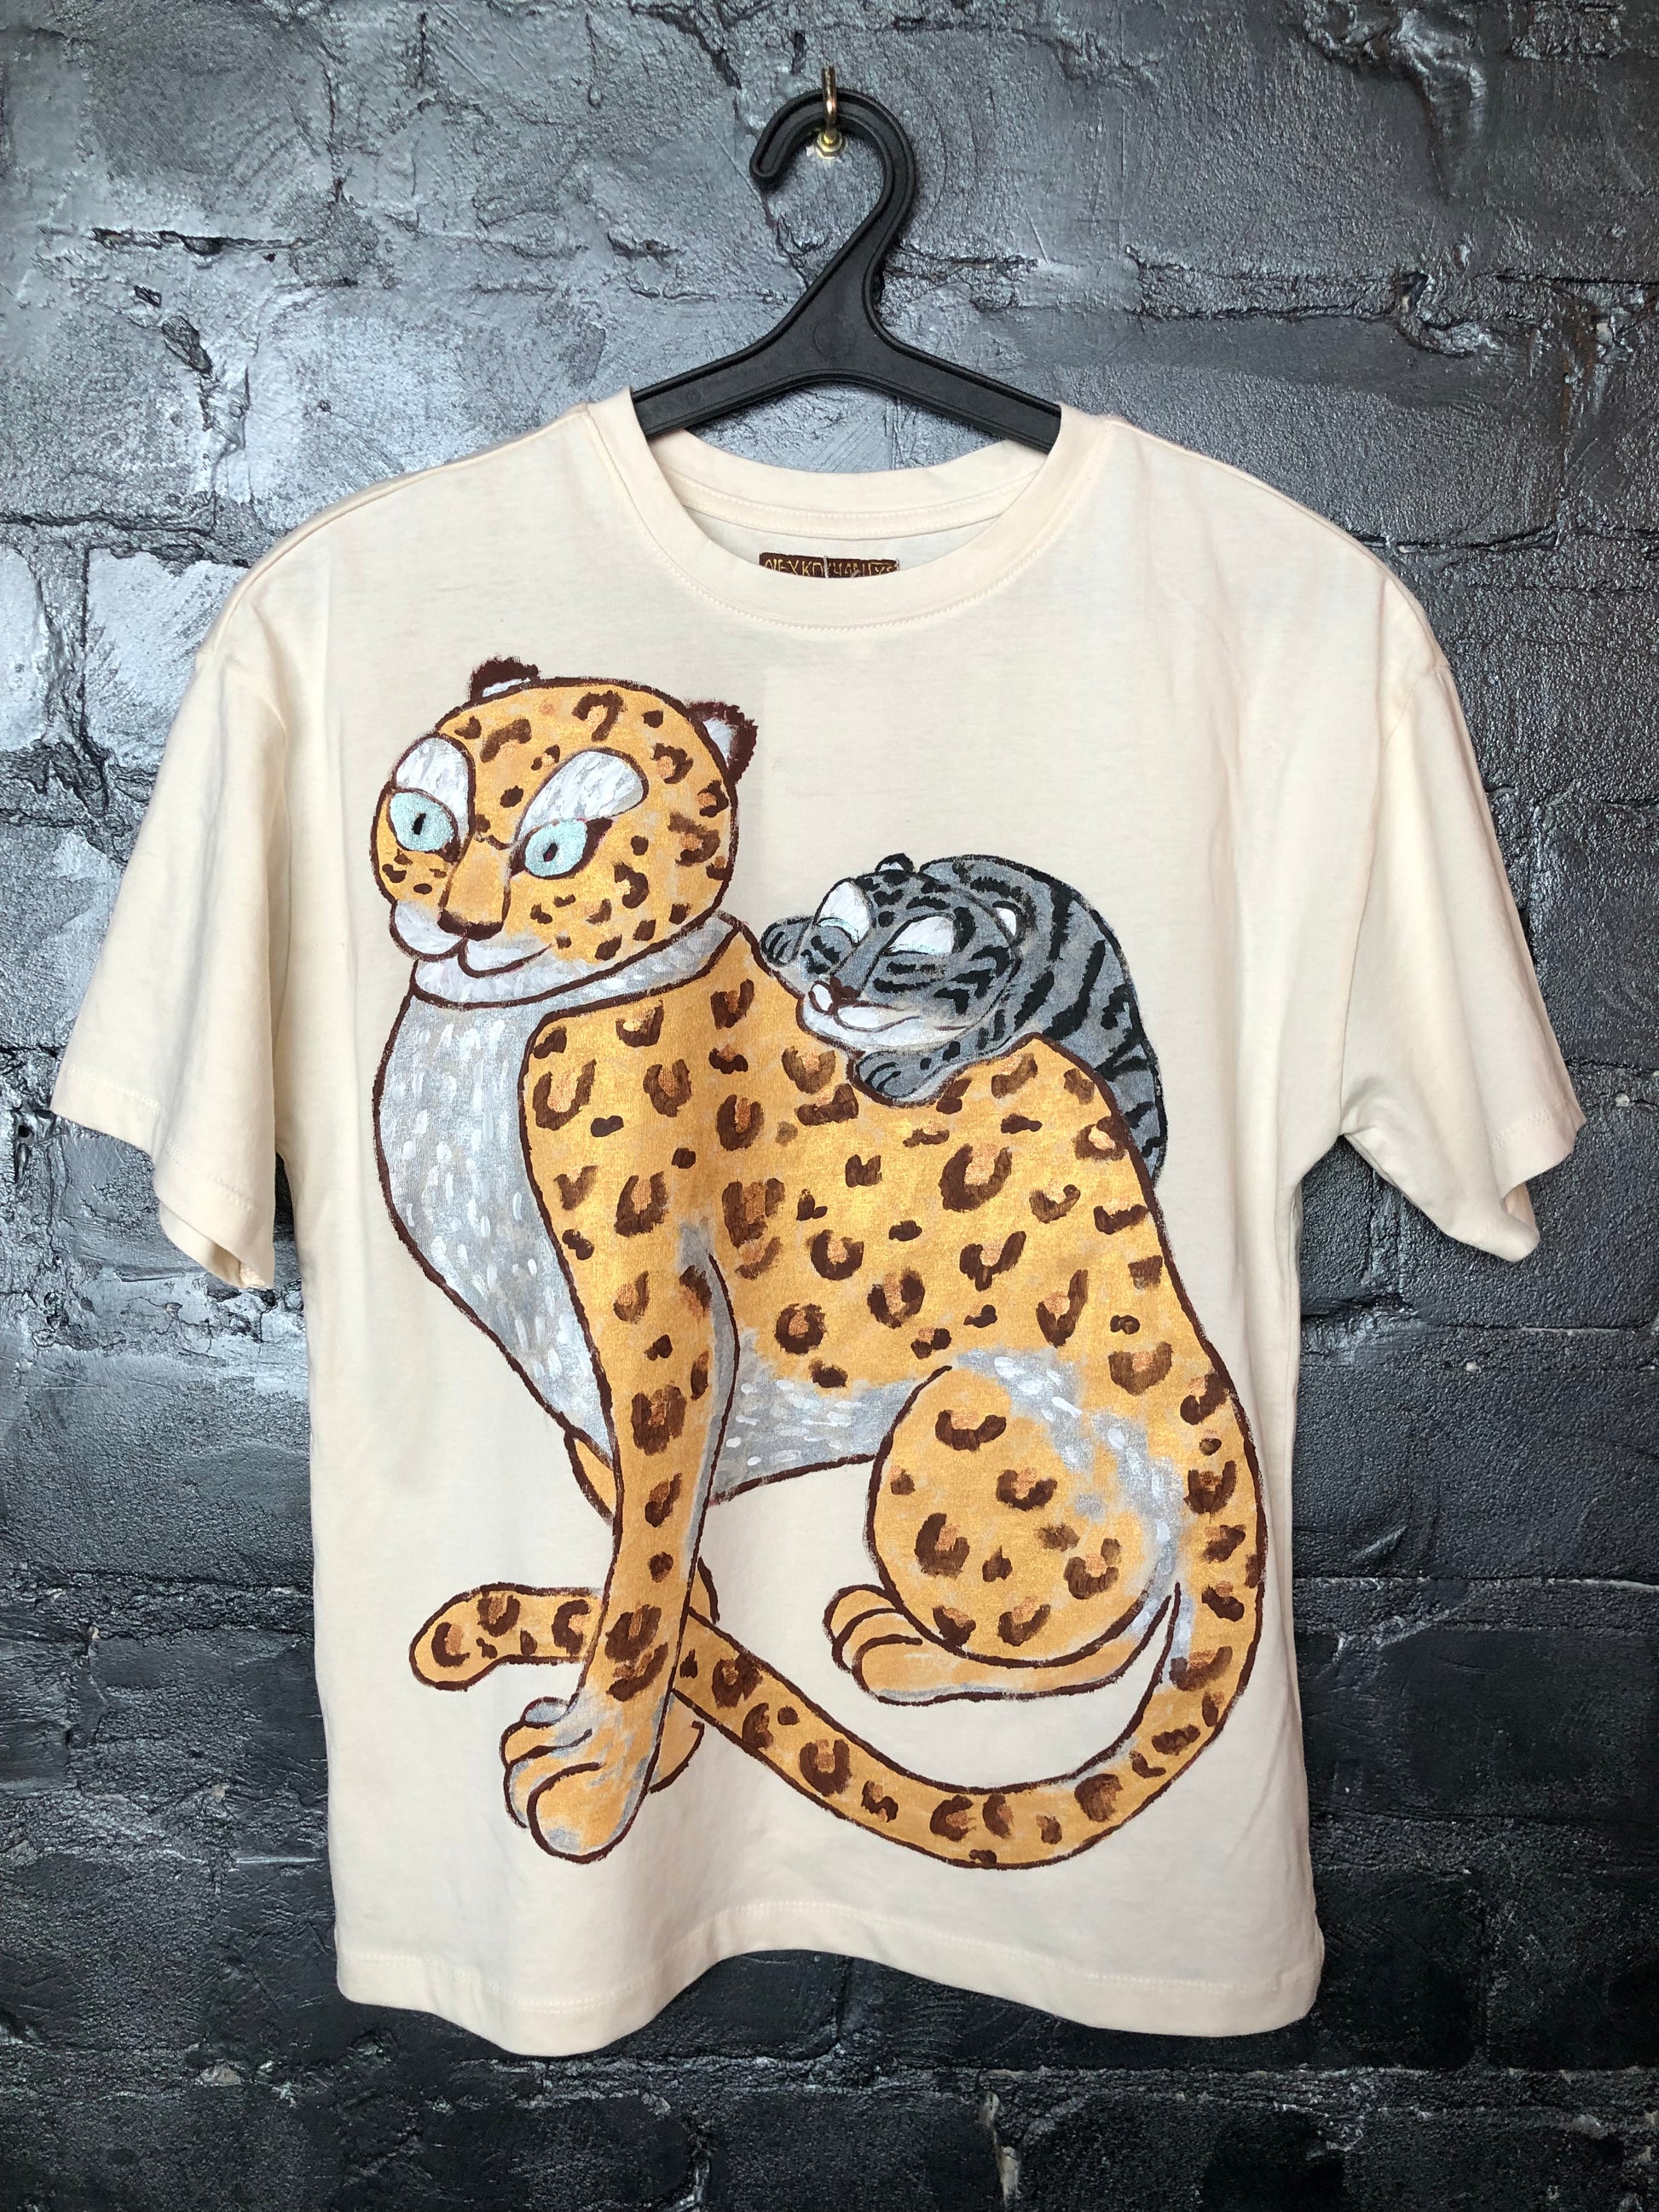 Women's Cool White Short Sleeve Panther T-shirt. Ladies fancy funky t-shirt.